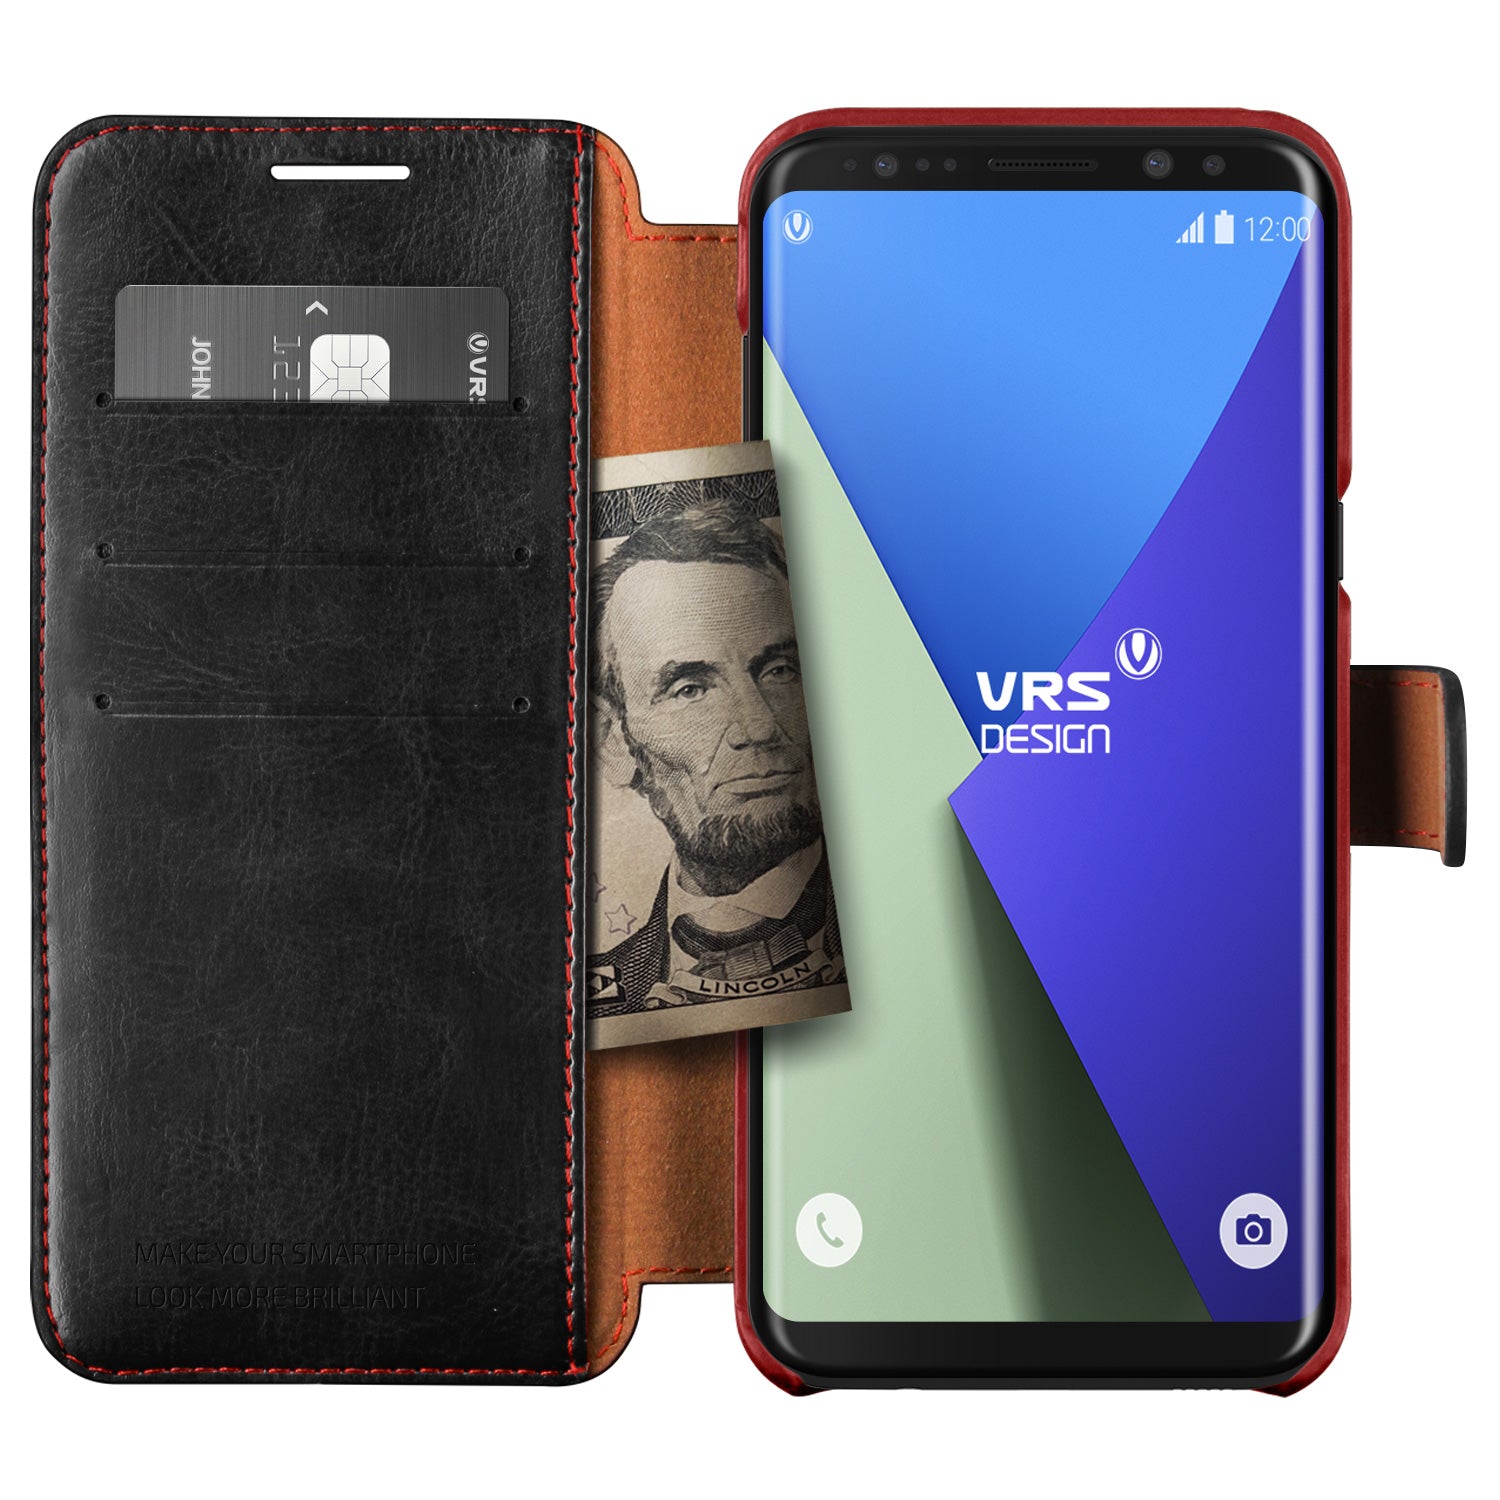 Samsung Galaxy S8 Plus rugged wallet case with multiple durable and convenient card slot with sleek minimalist look by VRS